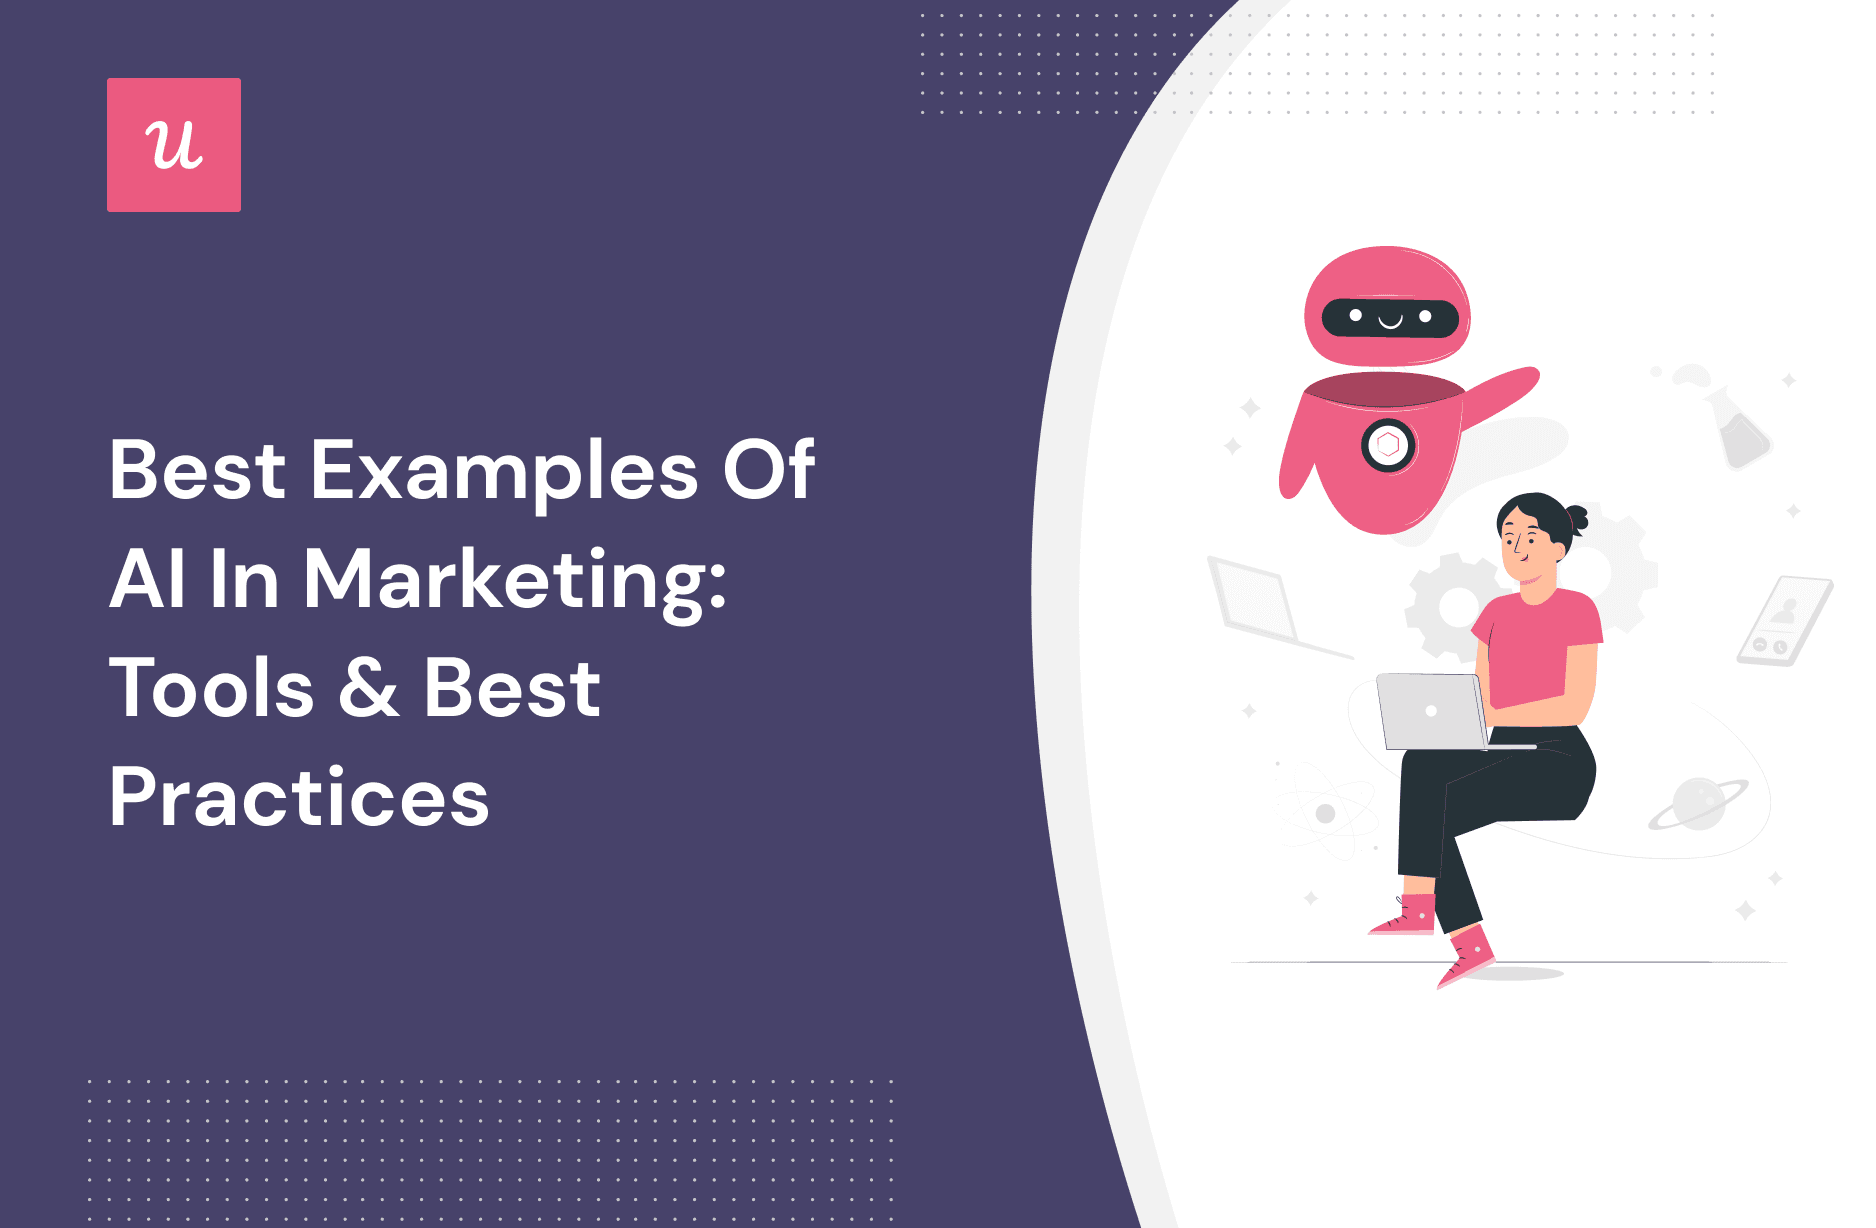 Best Examples of AI in Marketing: Tools & Best Practices cover